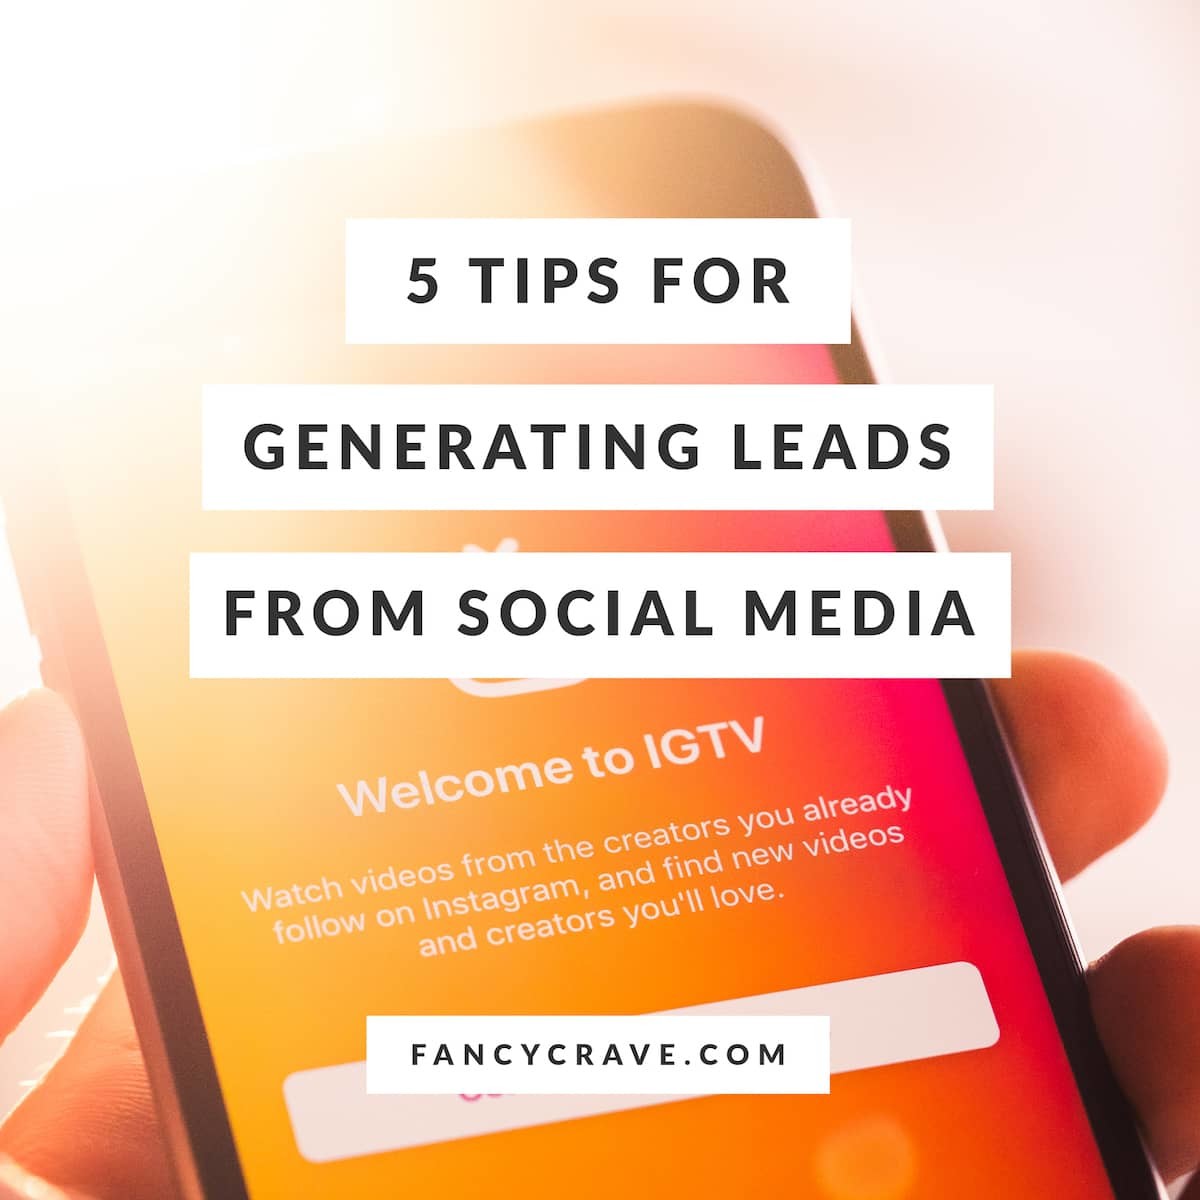 5 Tips For Generating Leads From Social Media